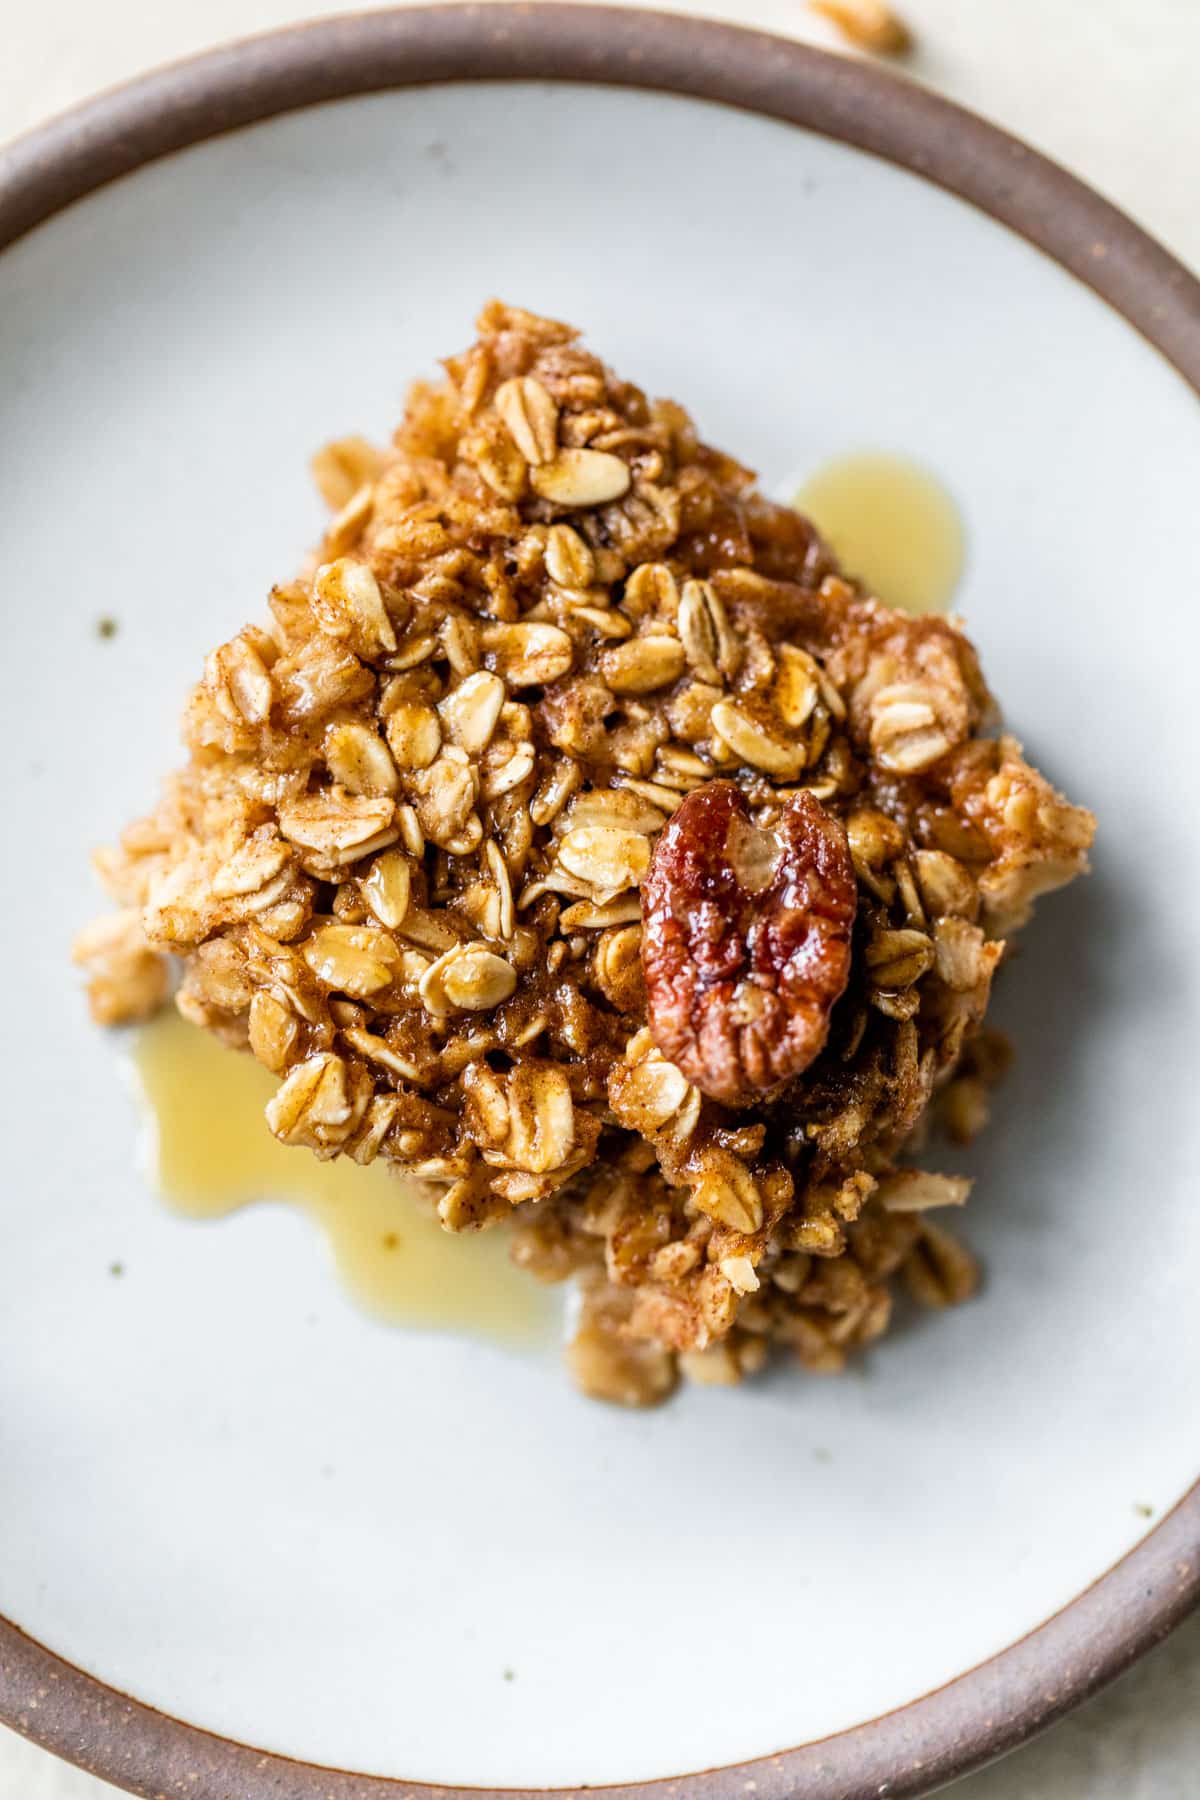 a piece of oatmeal topped with a pecan and maple syrup